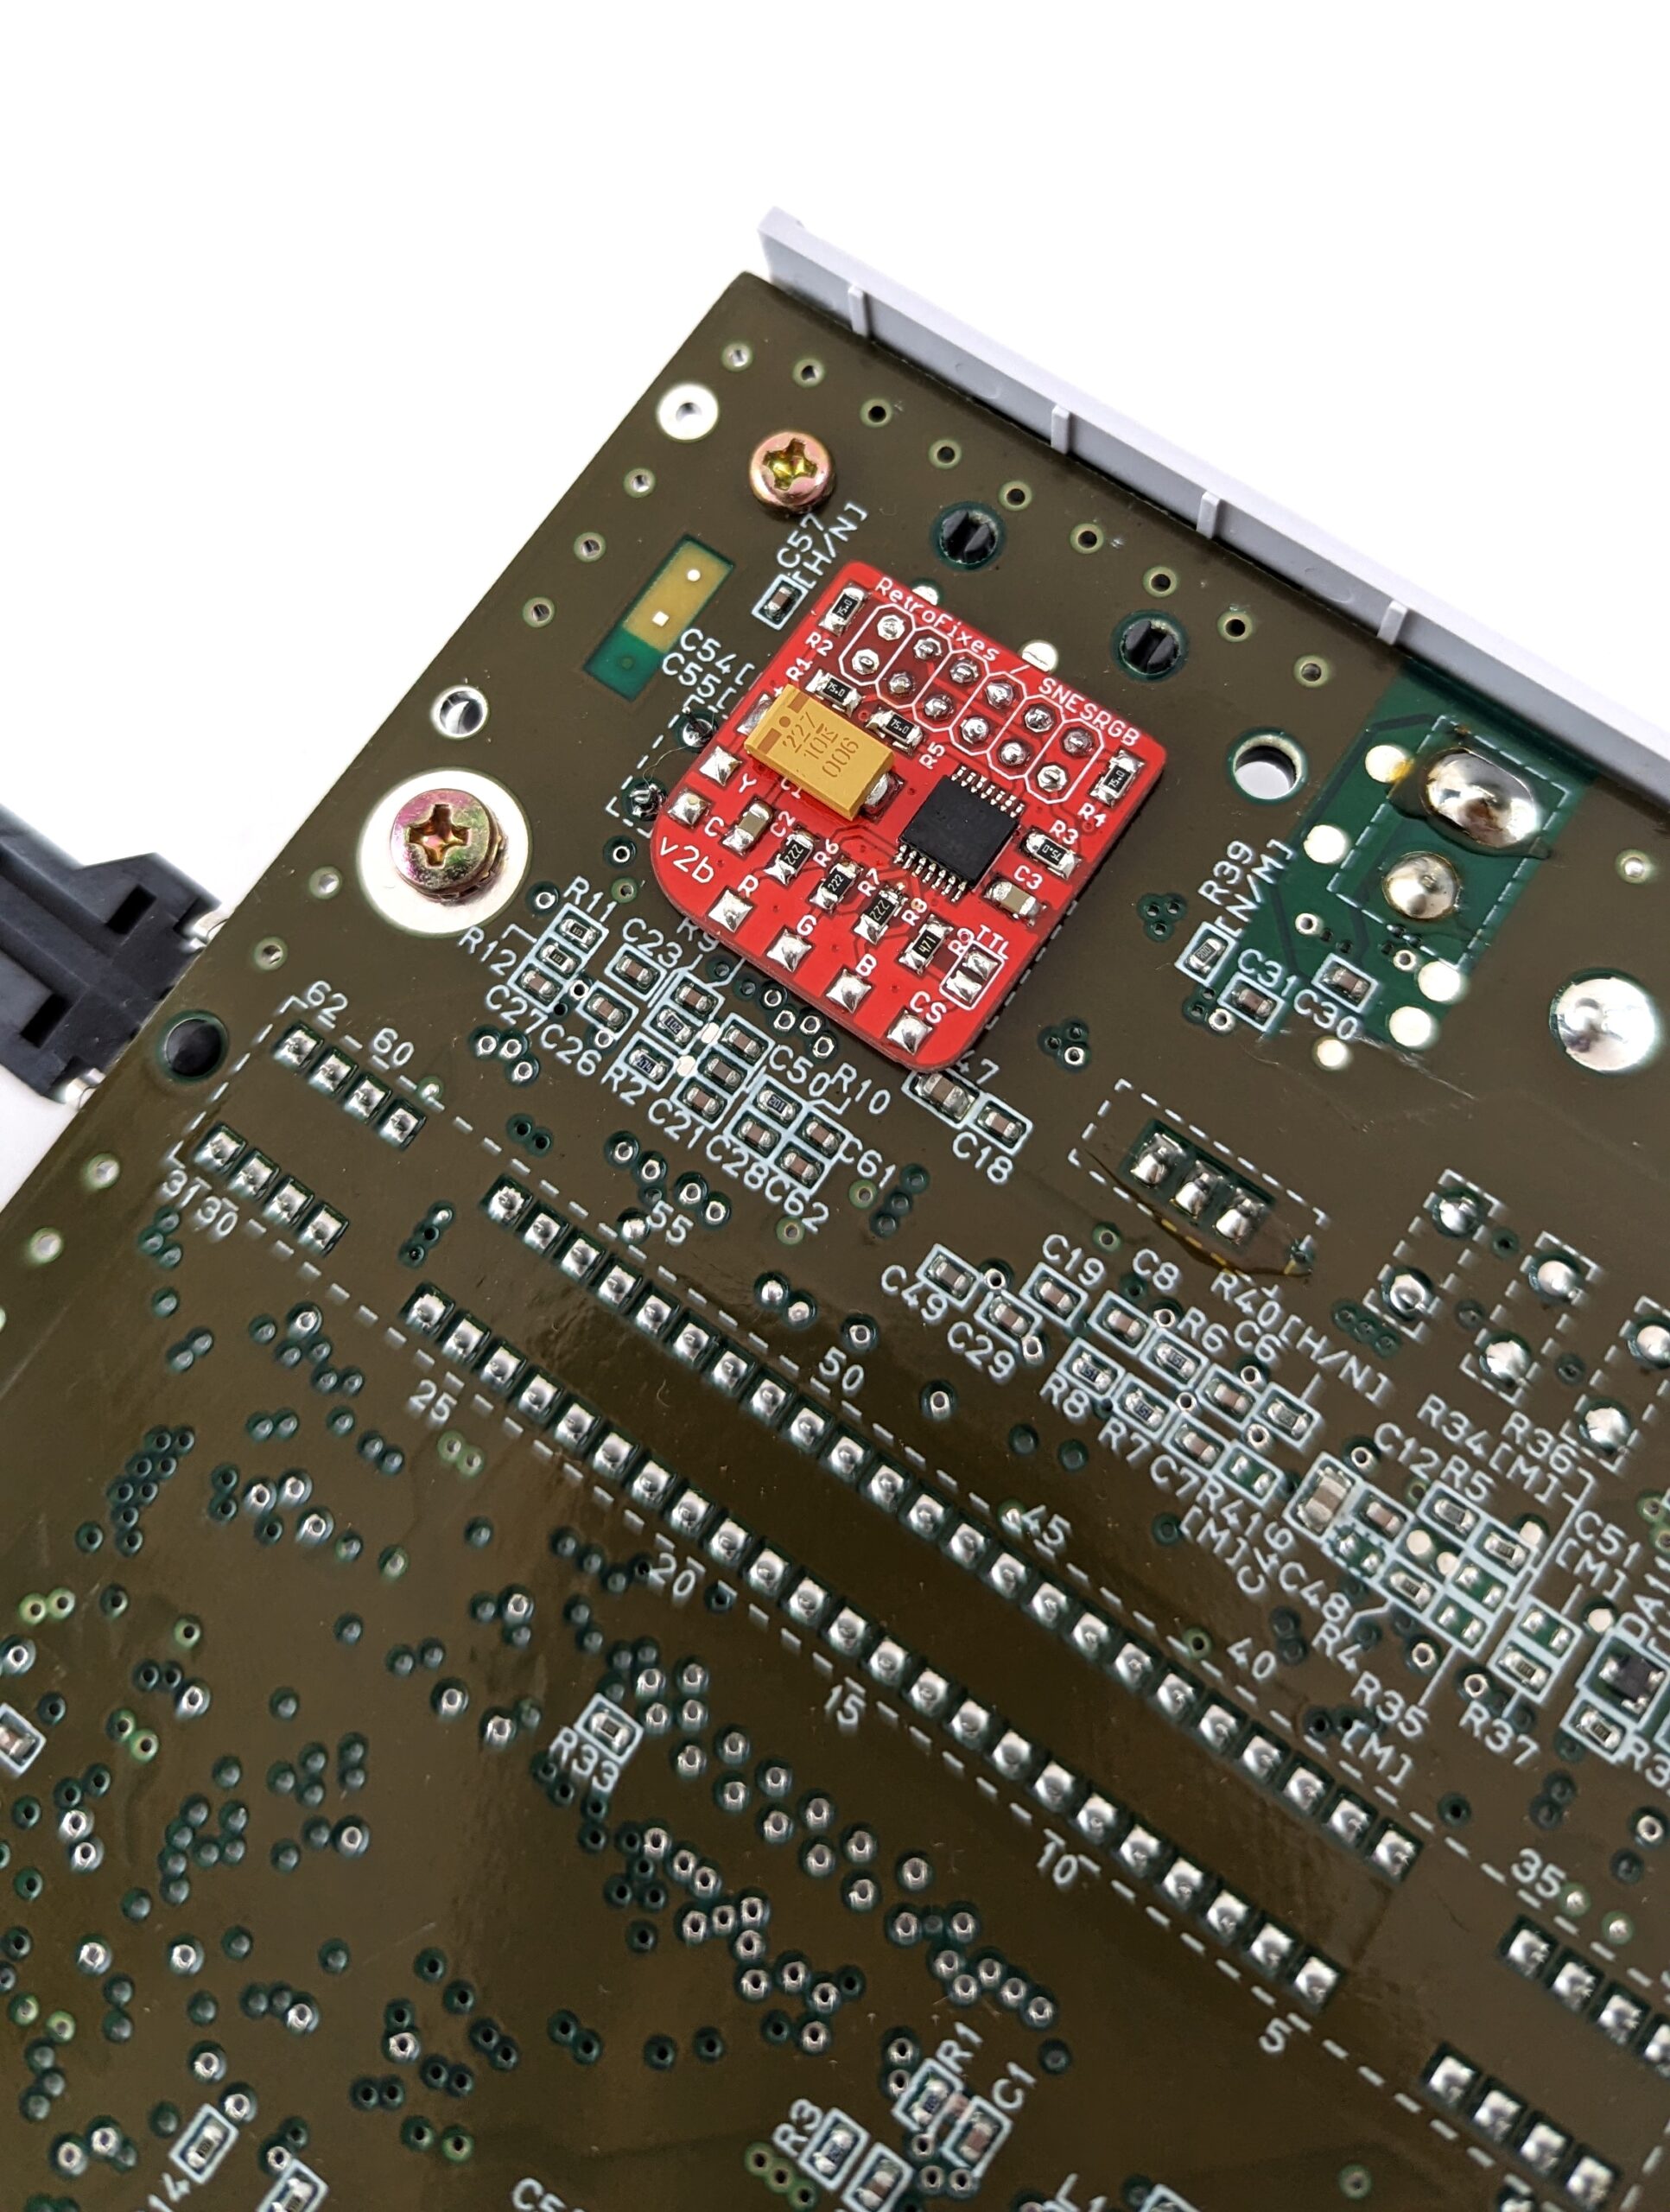 A red chip soldered onto the SNES's main PCB.